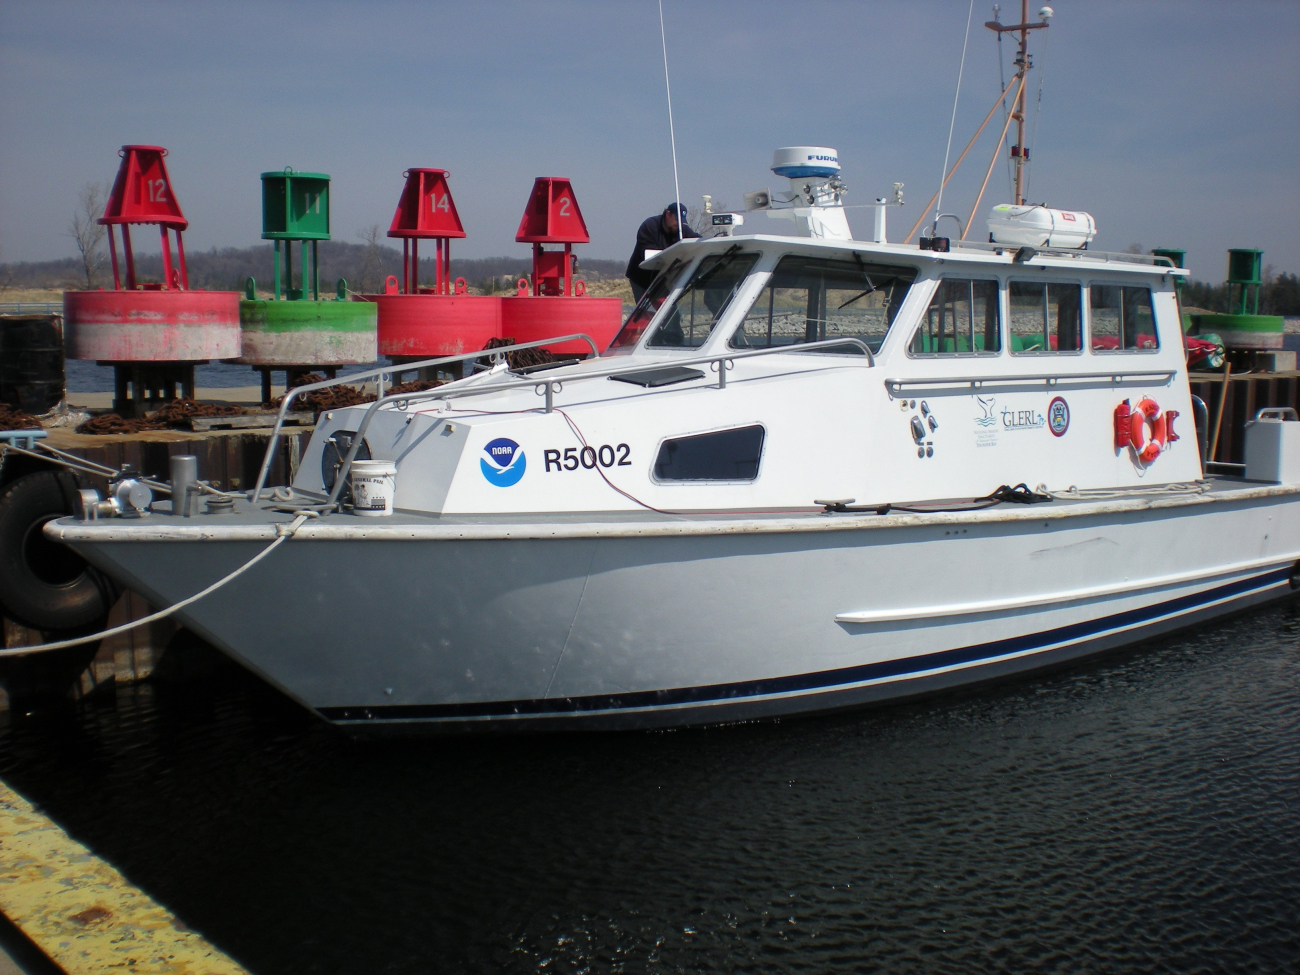 NOAA Great Lakes Research Vessel STORM